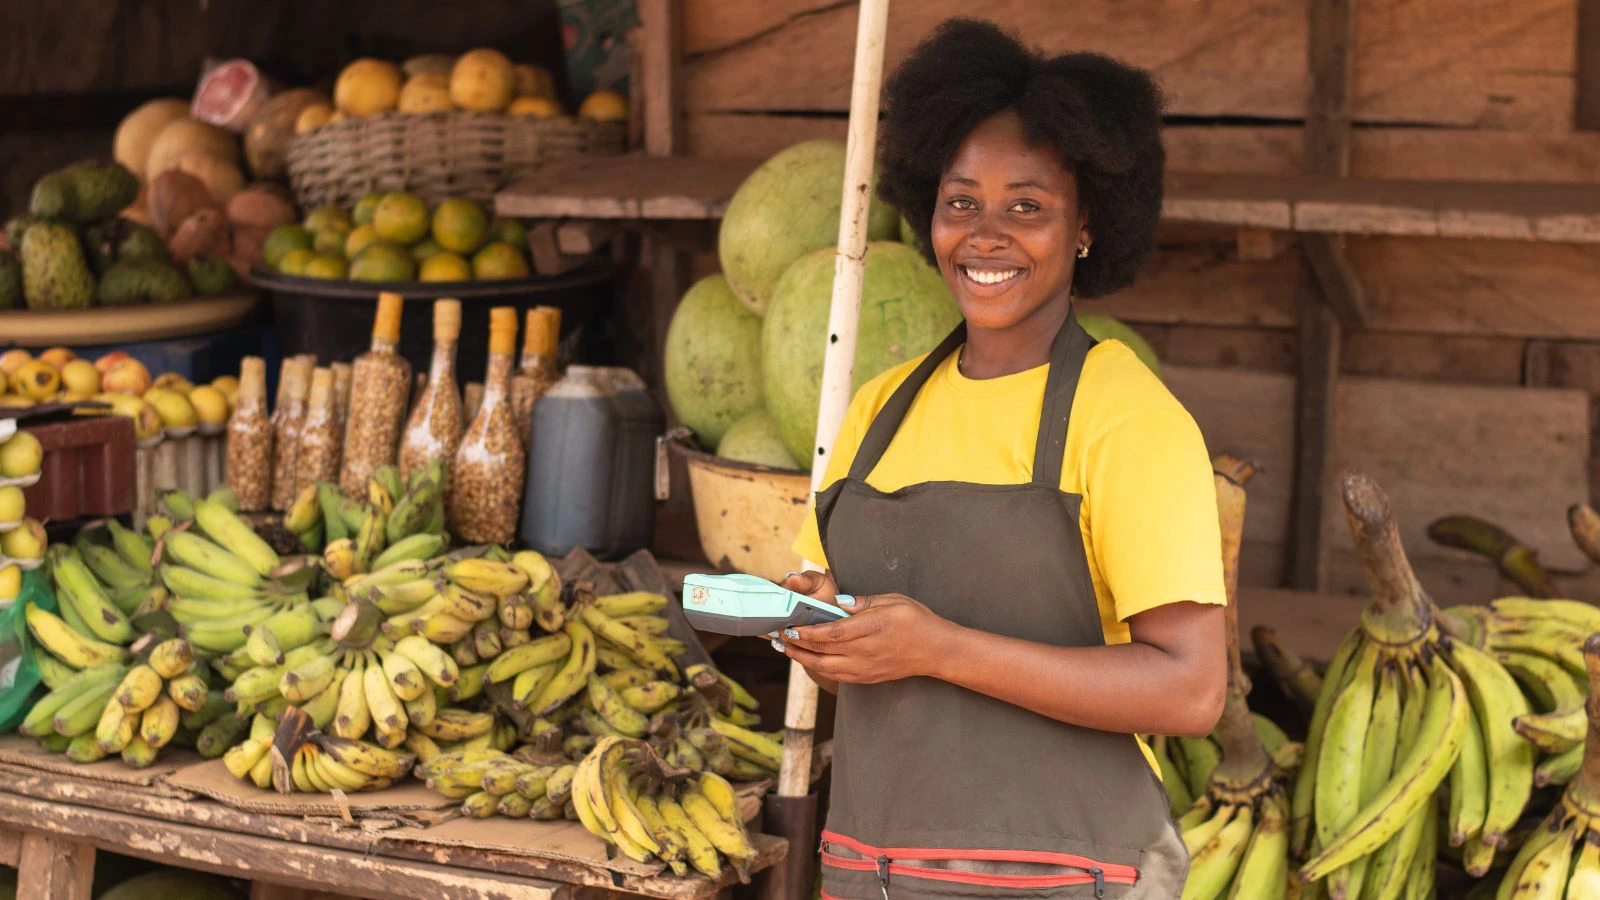 Woman using mobile payments at fruit stand in market